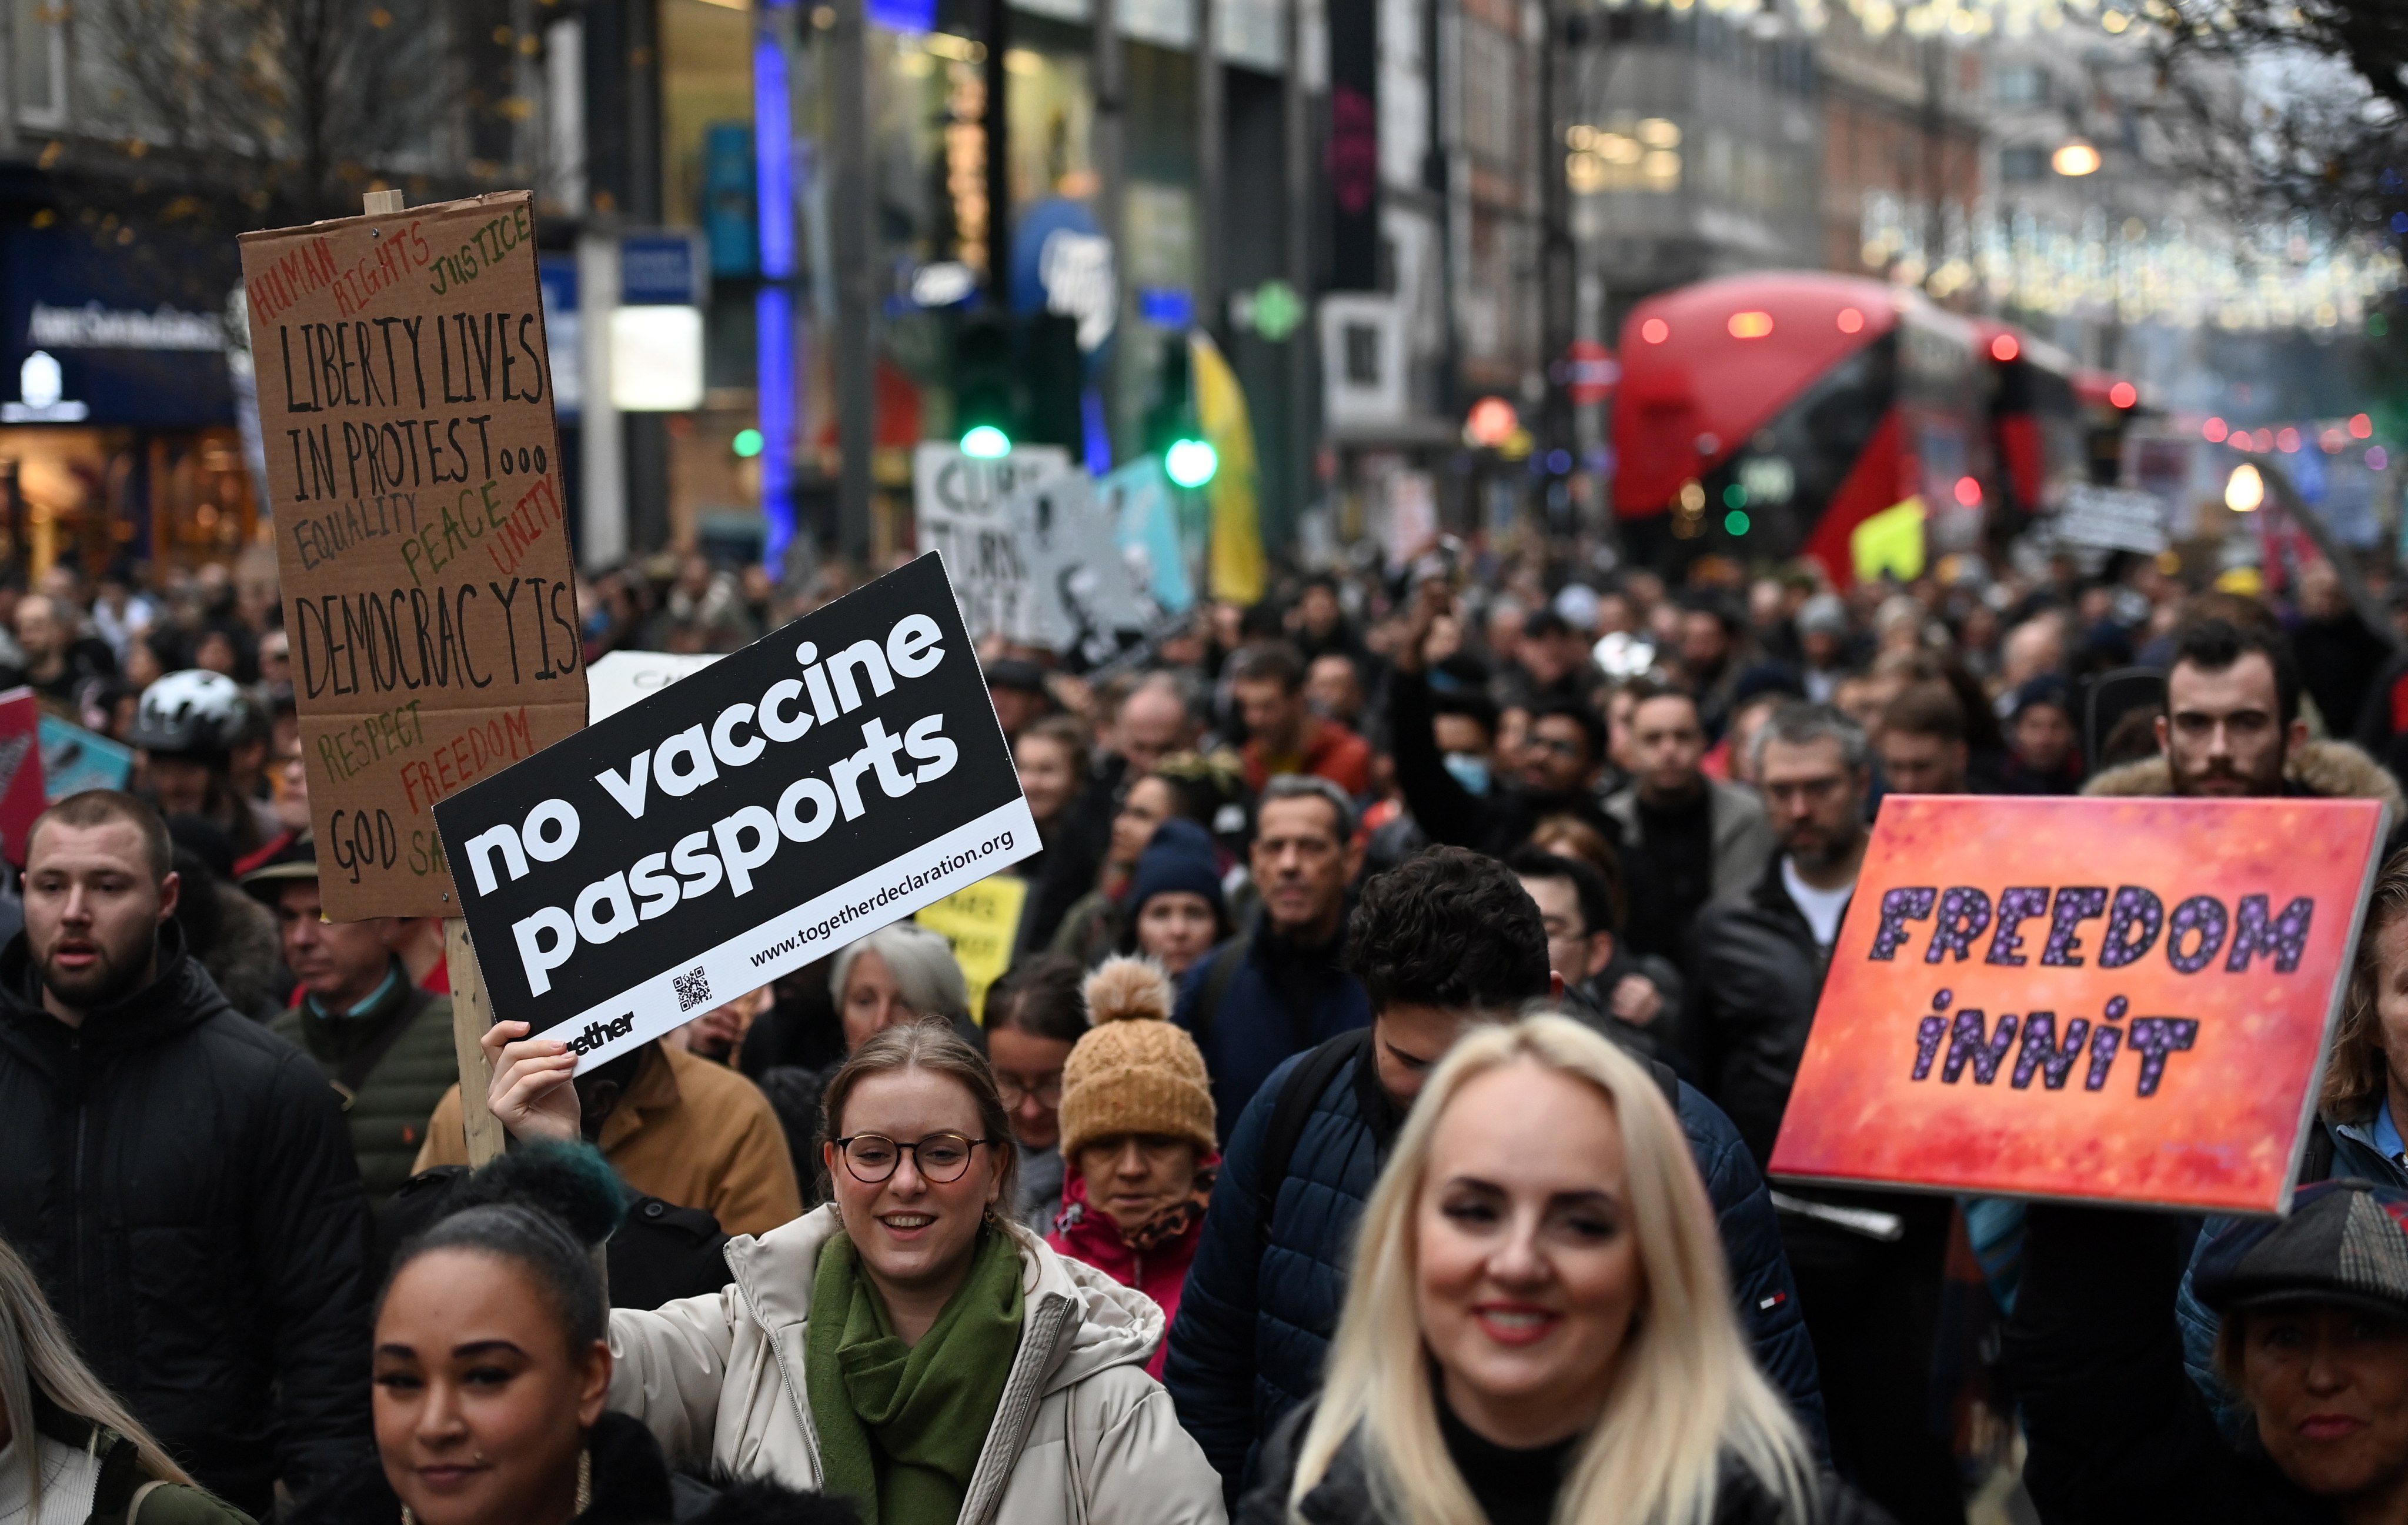 People protest against a Covid-19 lockdown in London on December 18, 2021. Photo: EPA-EFE